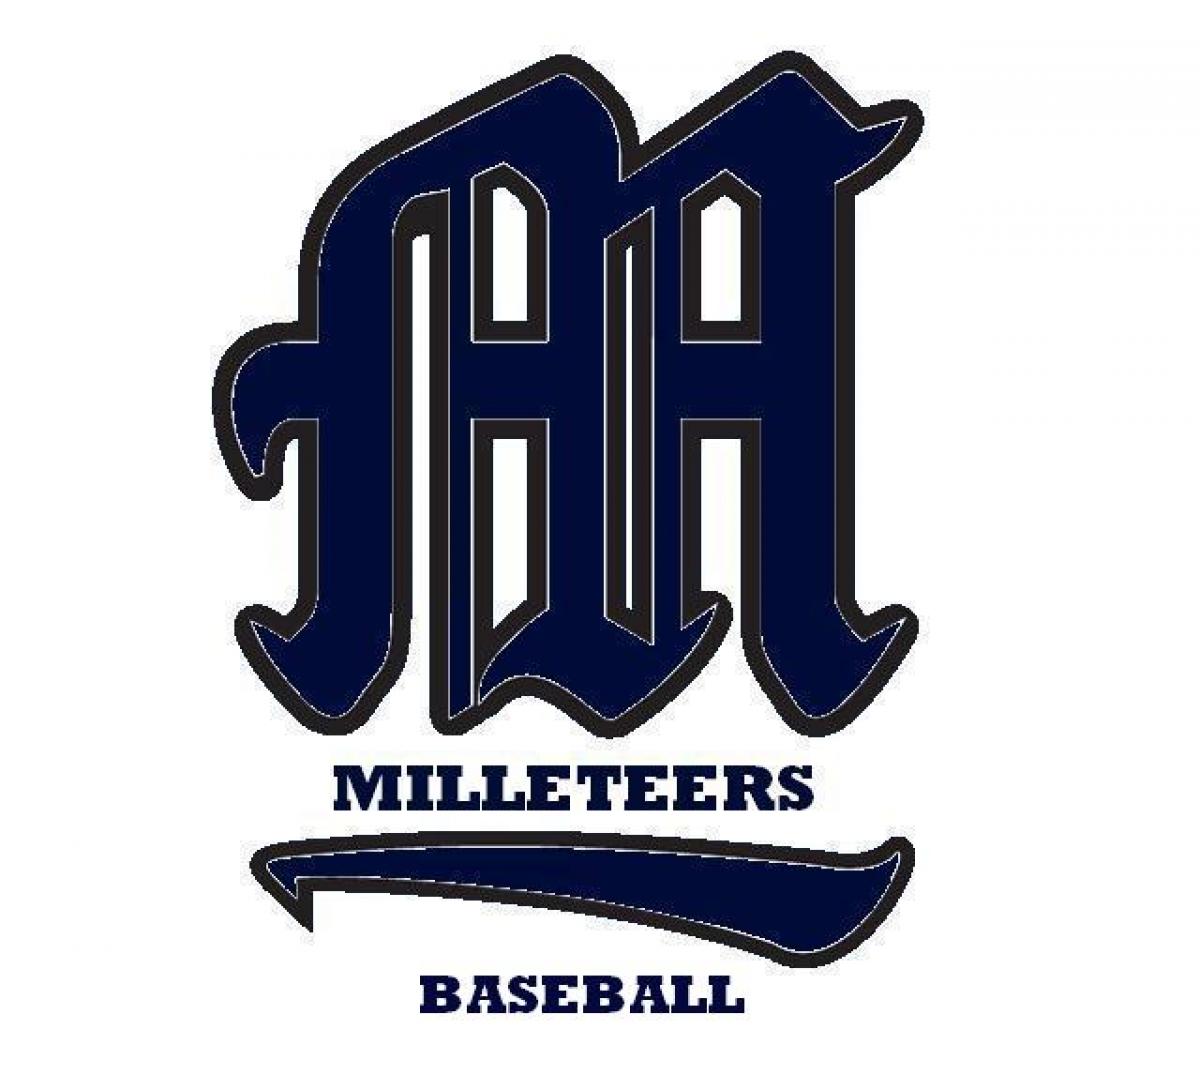 Milleteers Cruise To Game One Victory